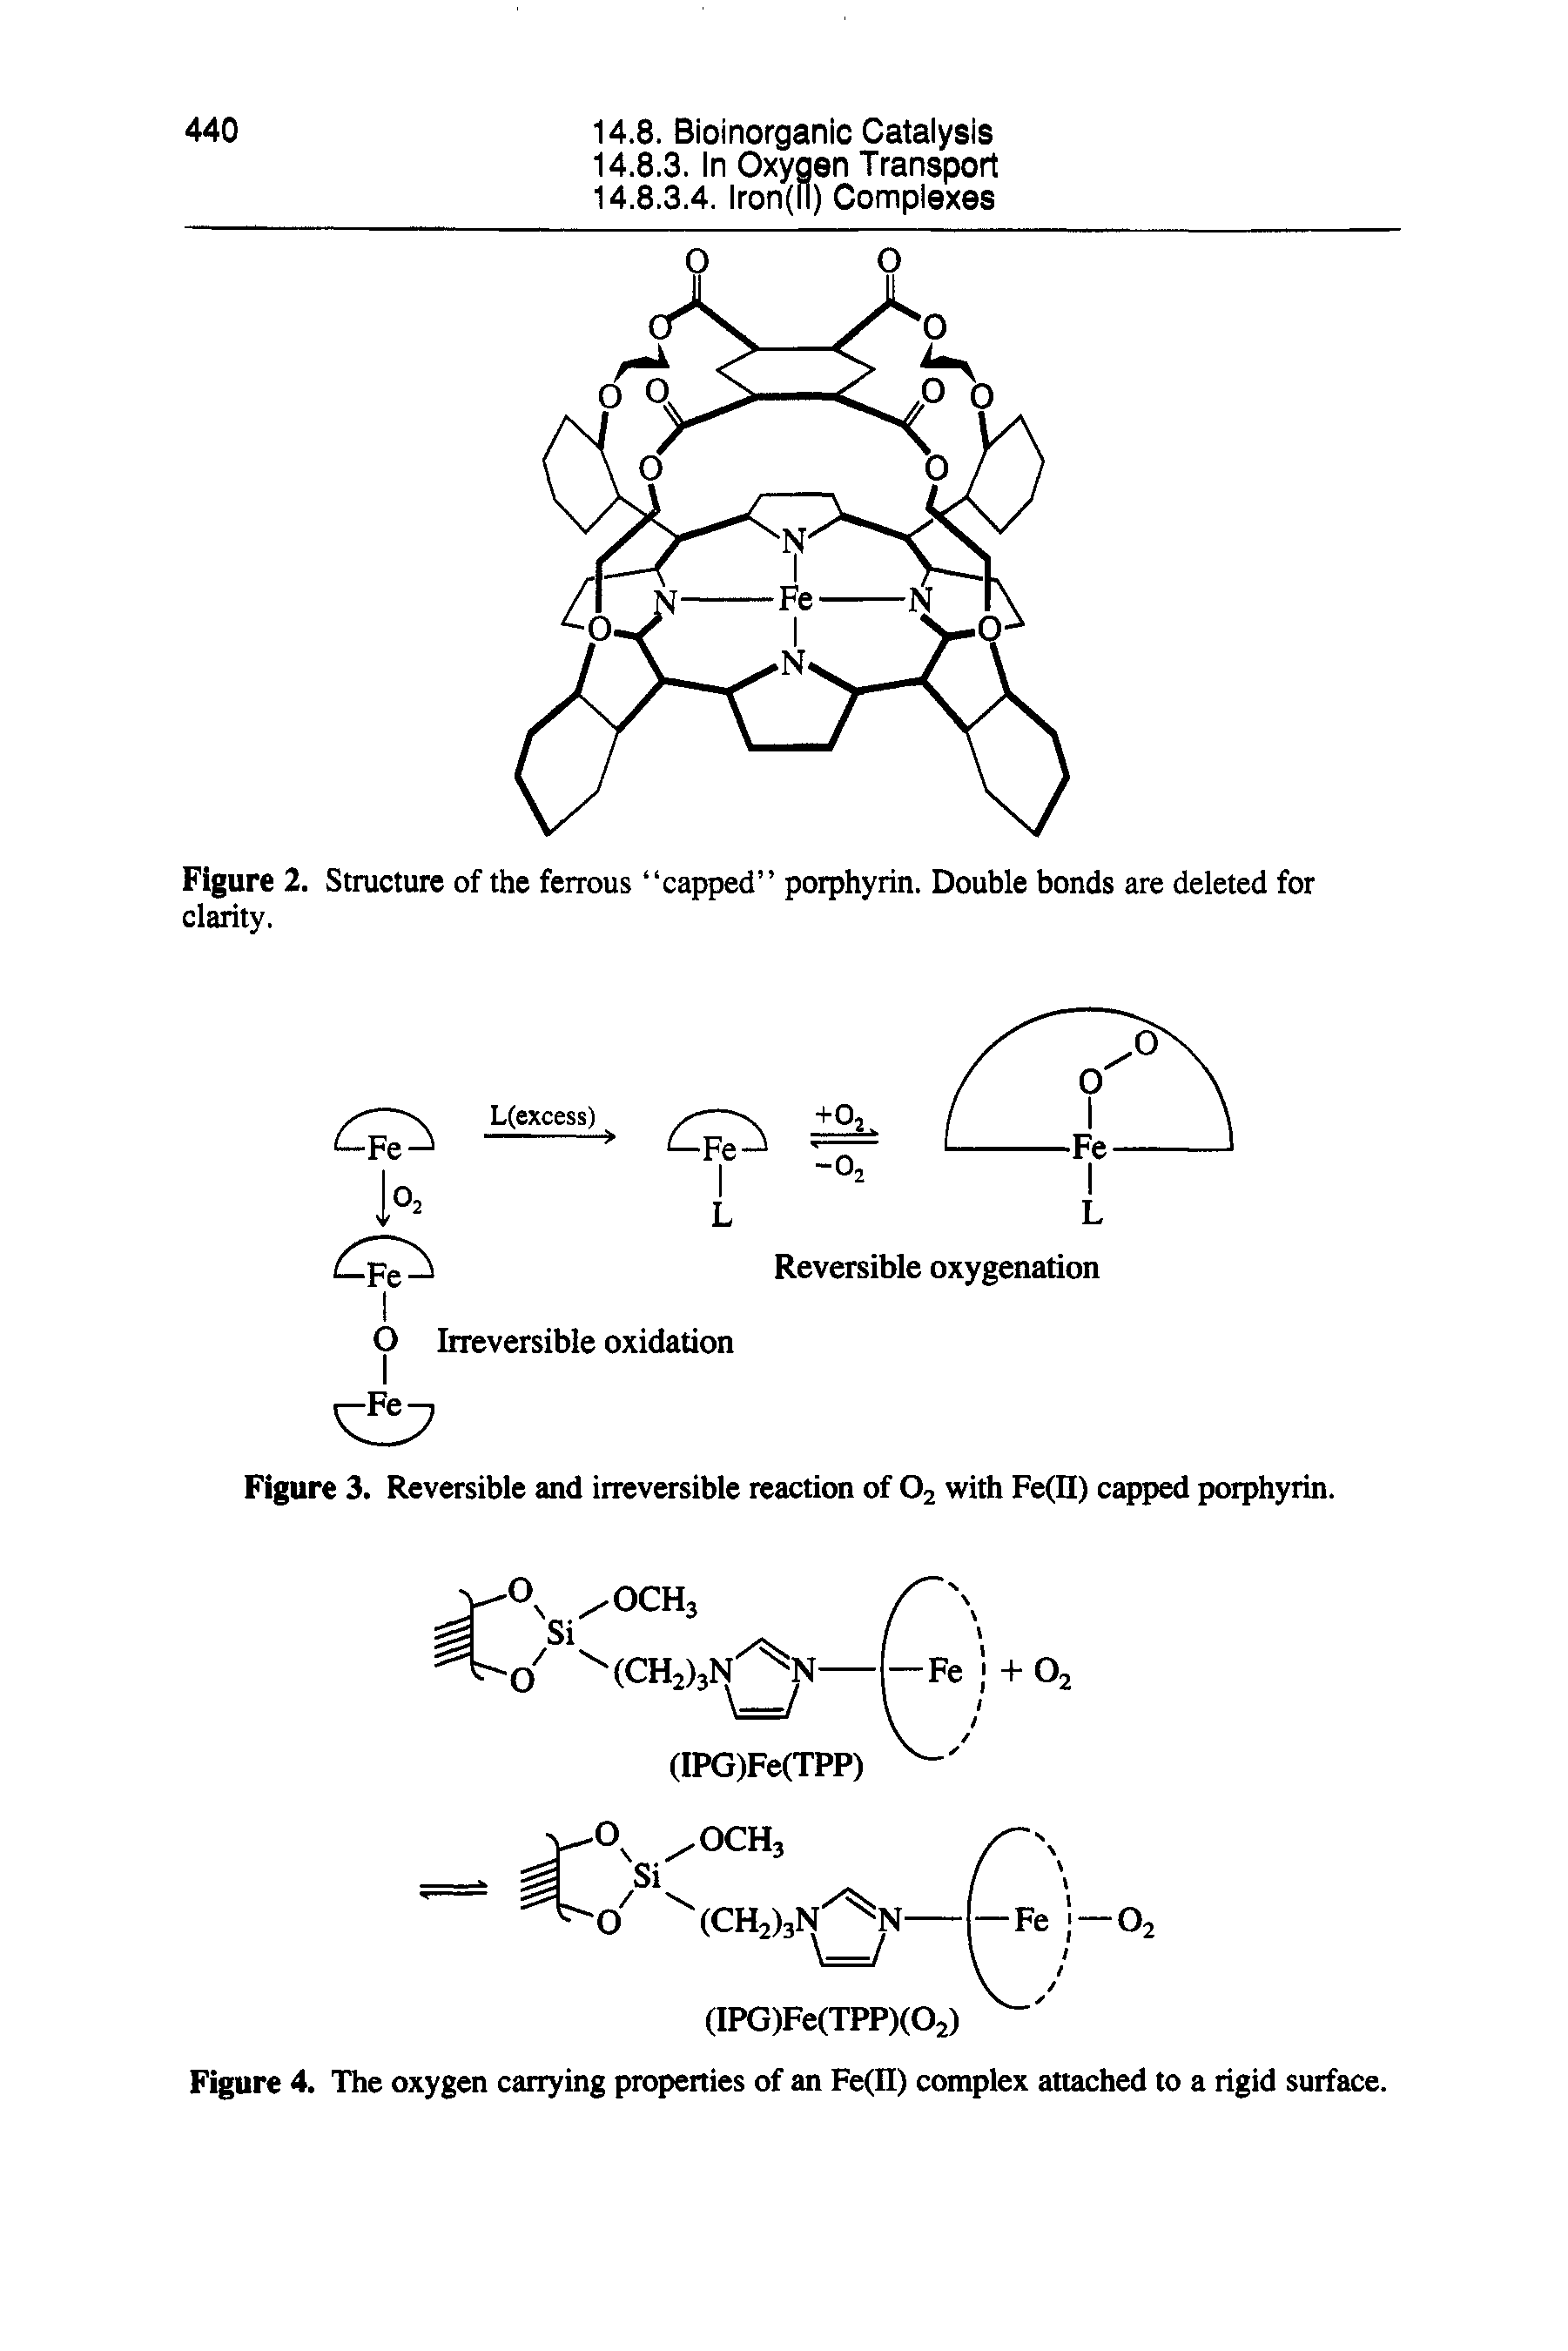 Figure 3. Reversible and irreversible reaction of O2 with Fe(Ii) capped porphyrin.